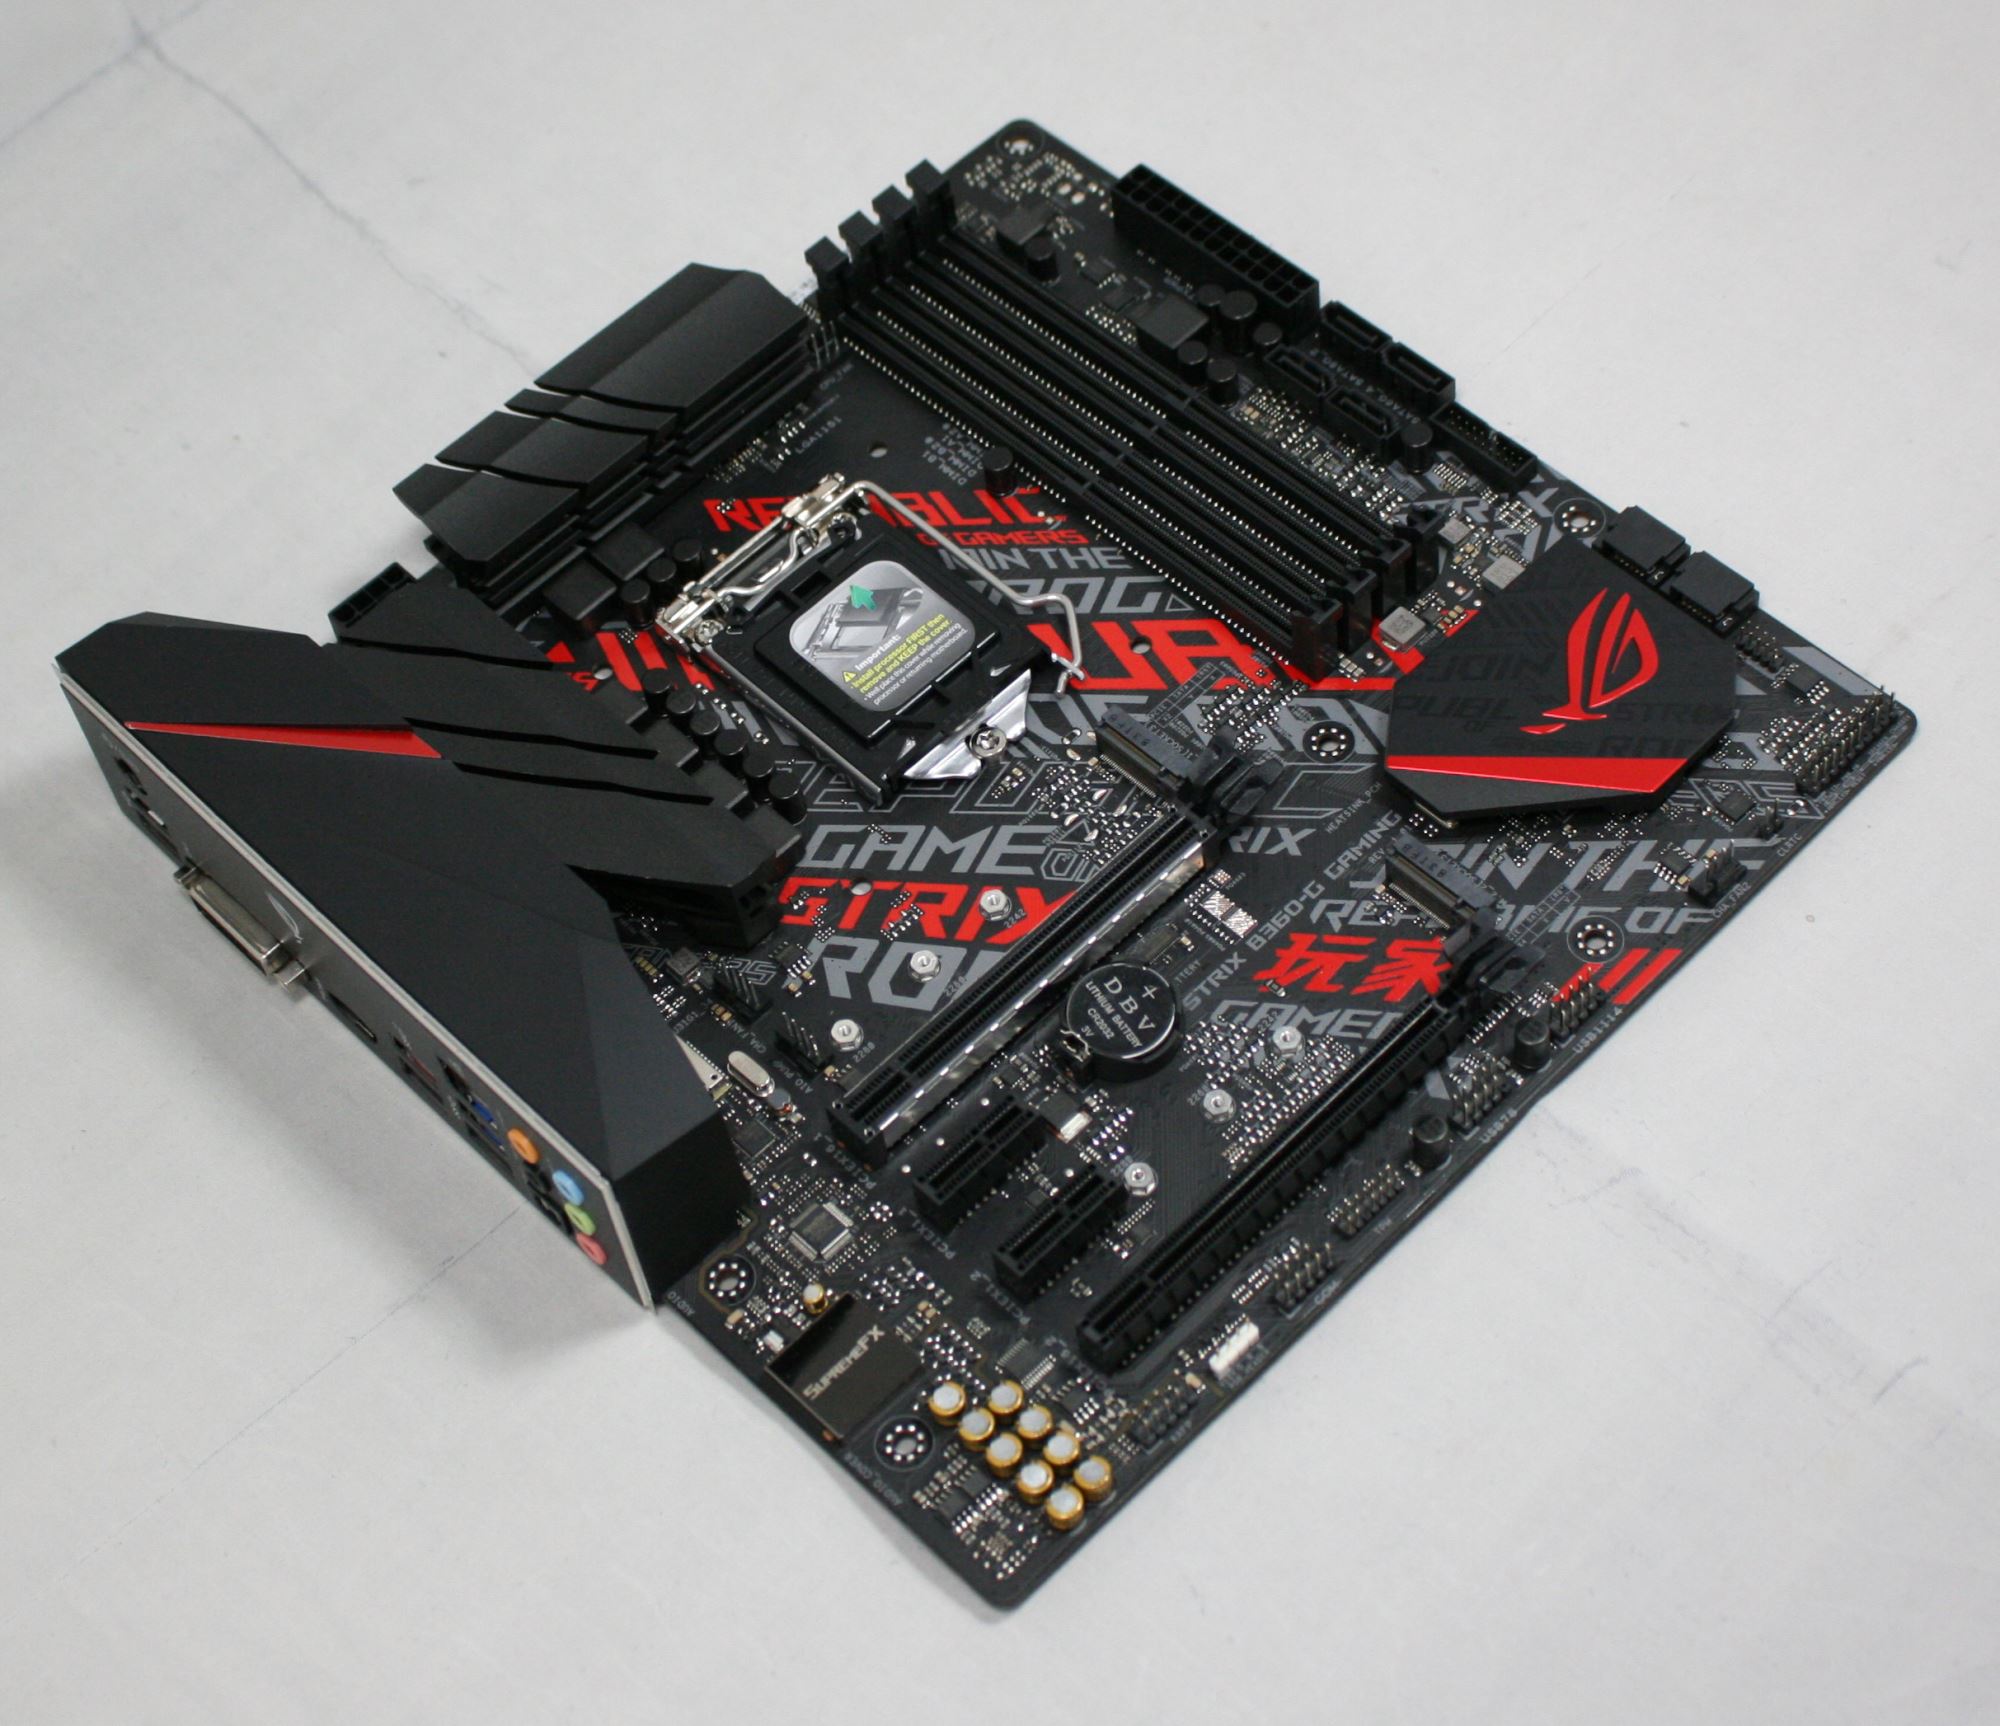 Visual Inspection The Asus Rog Strix 60 G Gaming Review A Polarizing 100 Motherboard Design